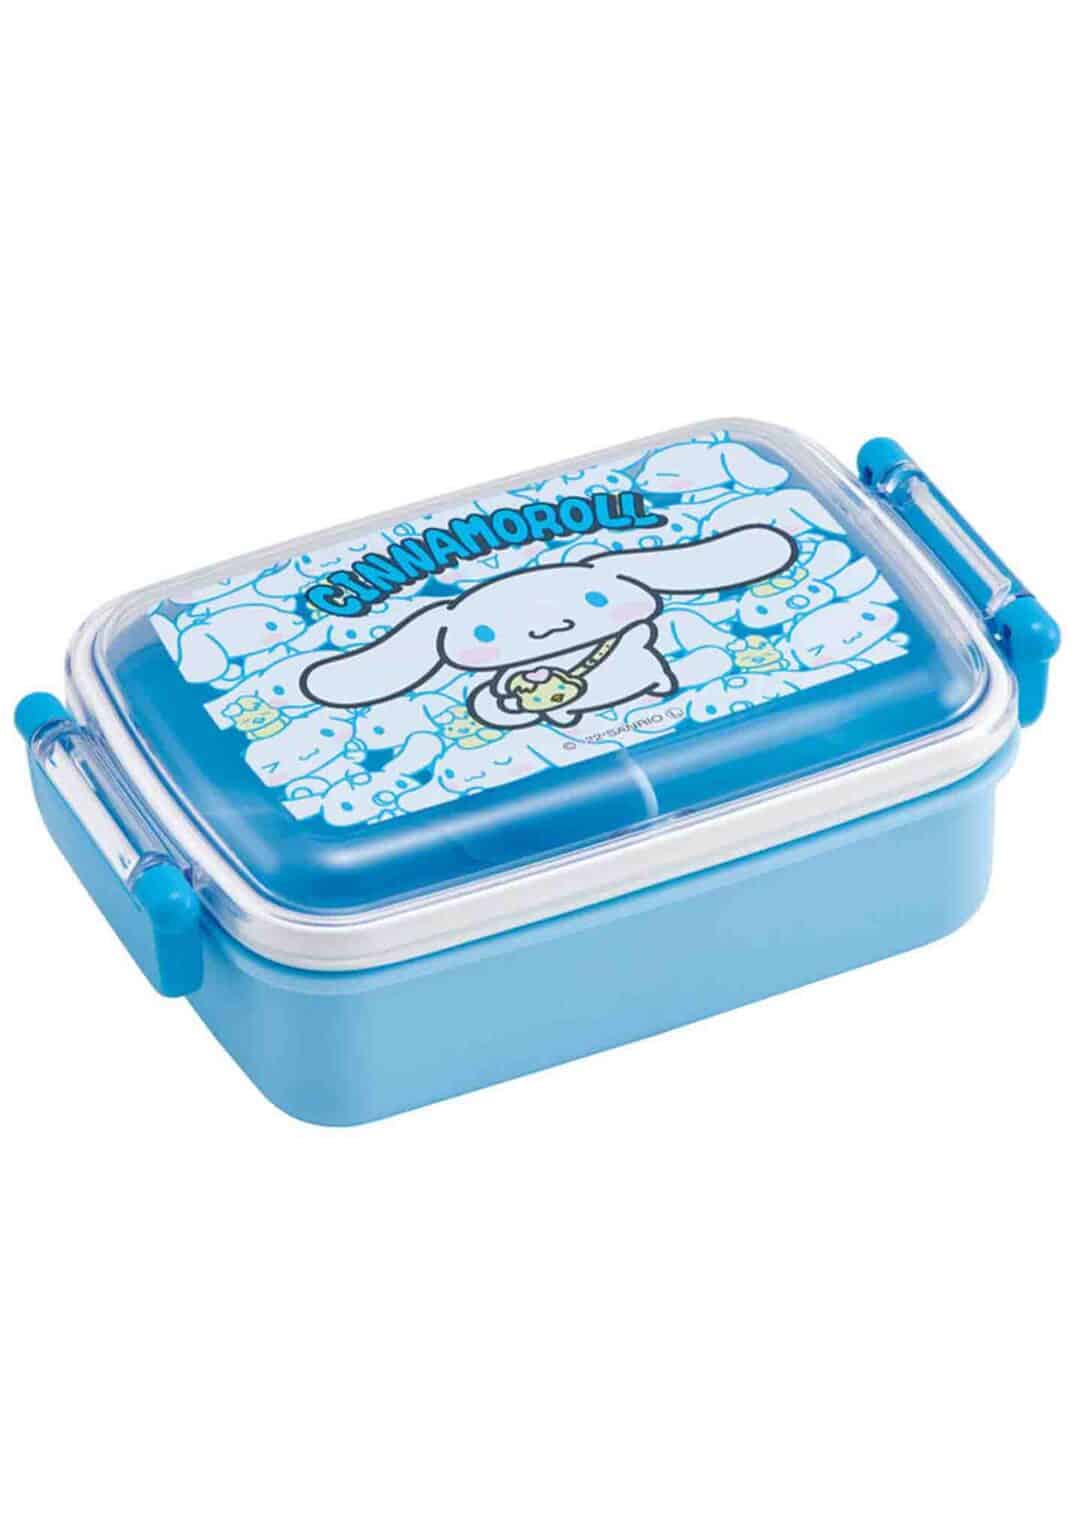 2005 Hello Kitty Sanrio Lunch Box Container Pink White WITH Spoon Fork bento  box